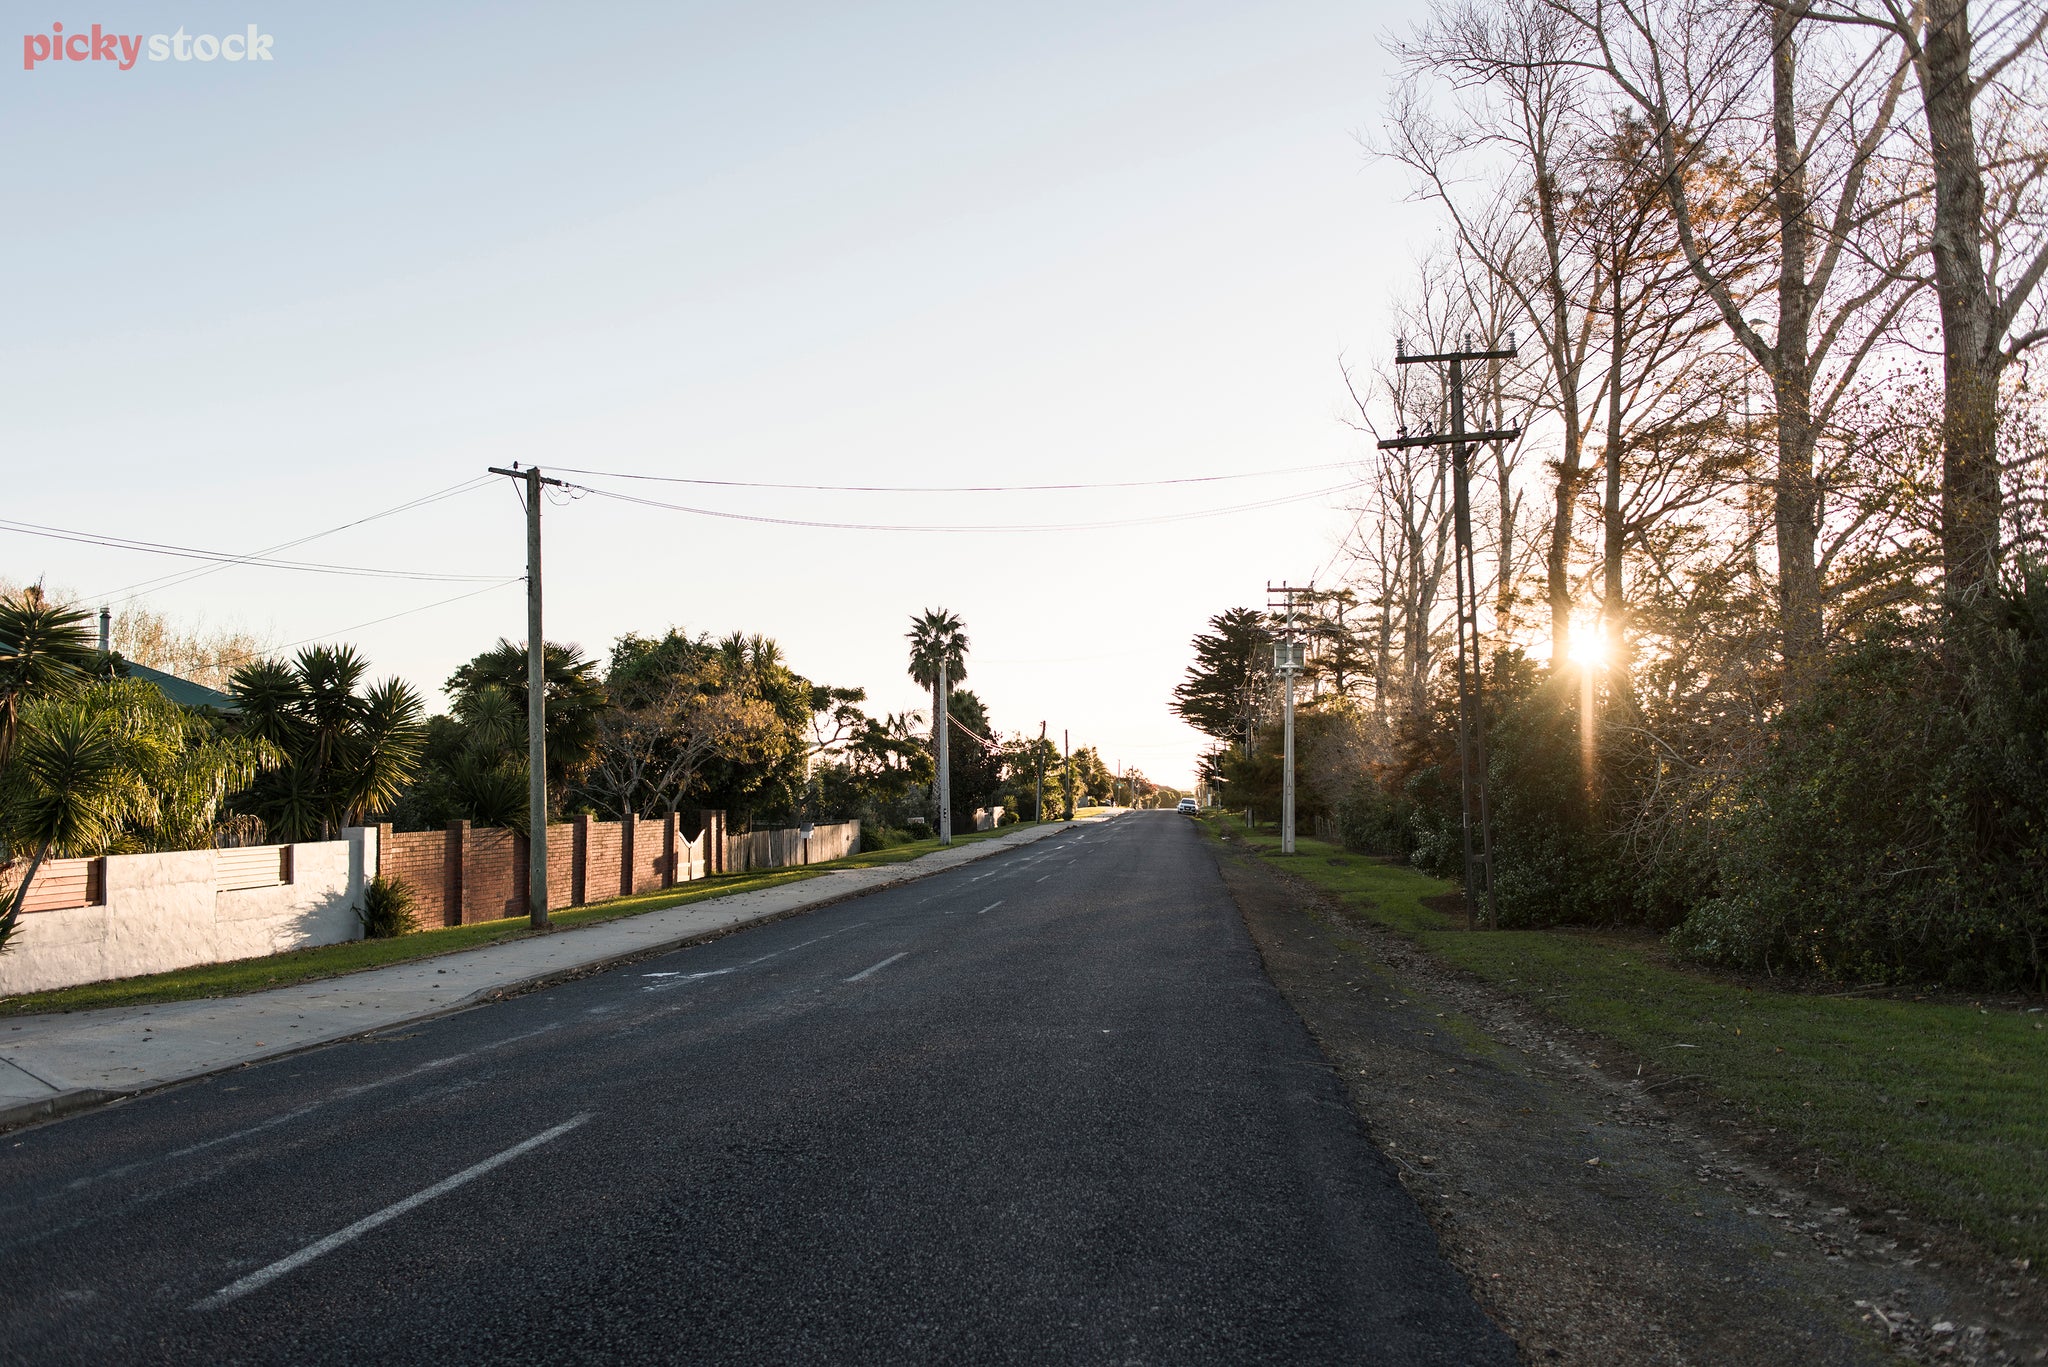 Early morning on an empty residential street. Powerlines and trees rise into the grey-blue sky.